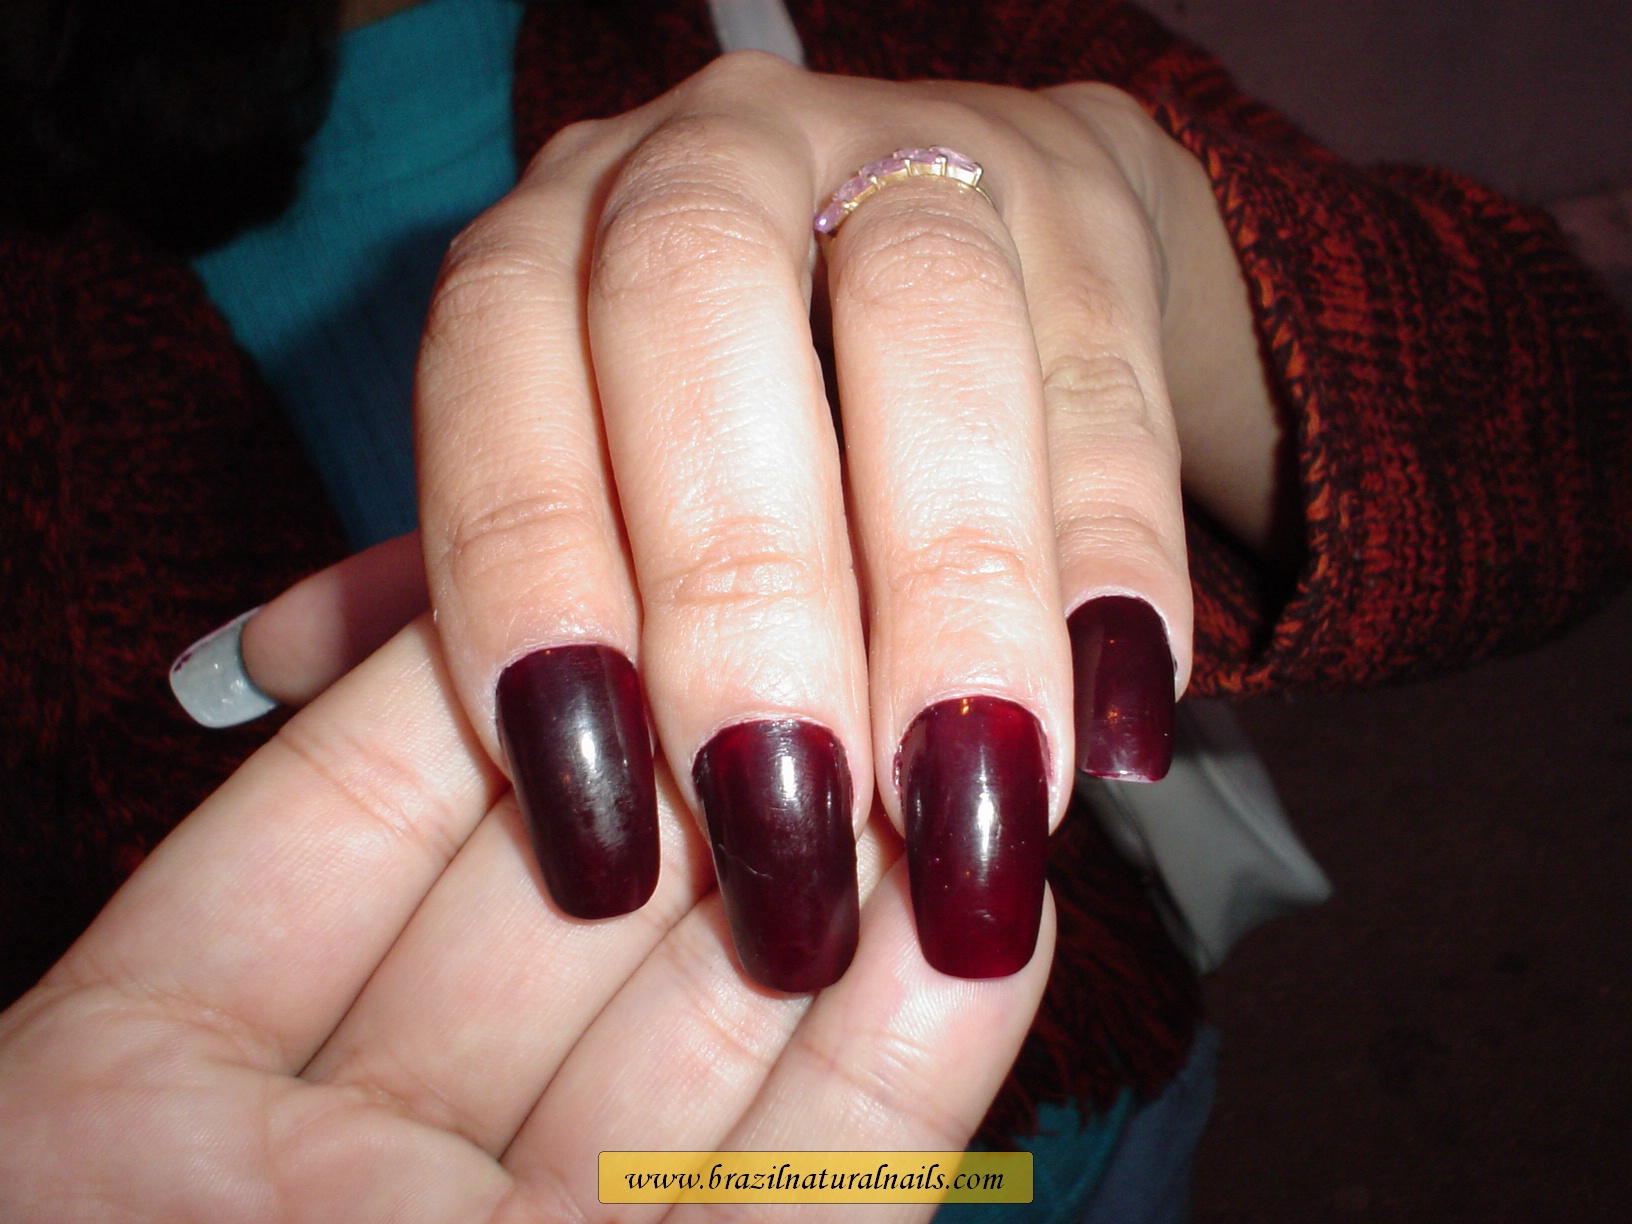 Brazil Natural Nails Archive Galleries